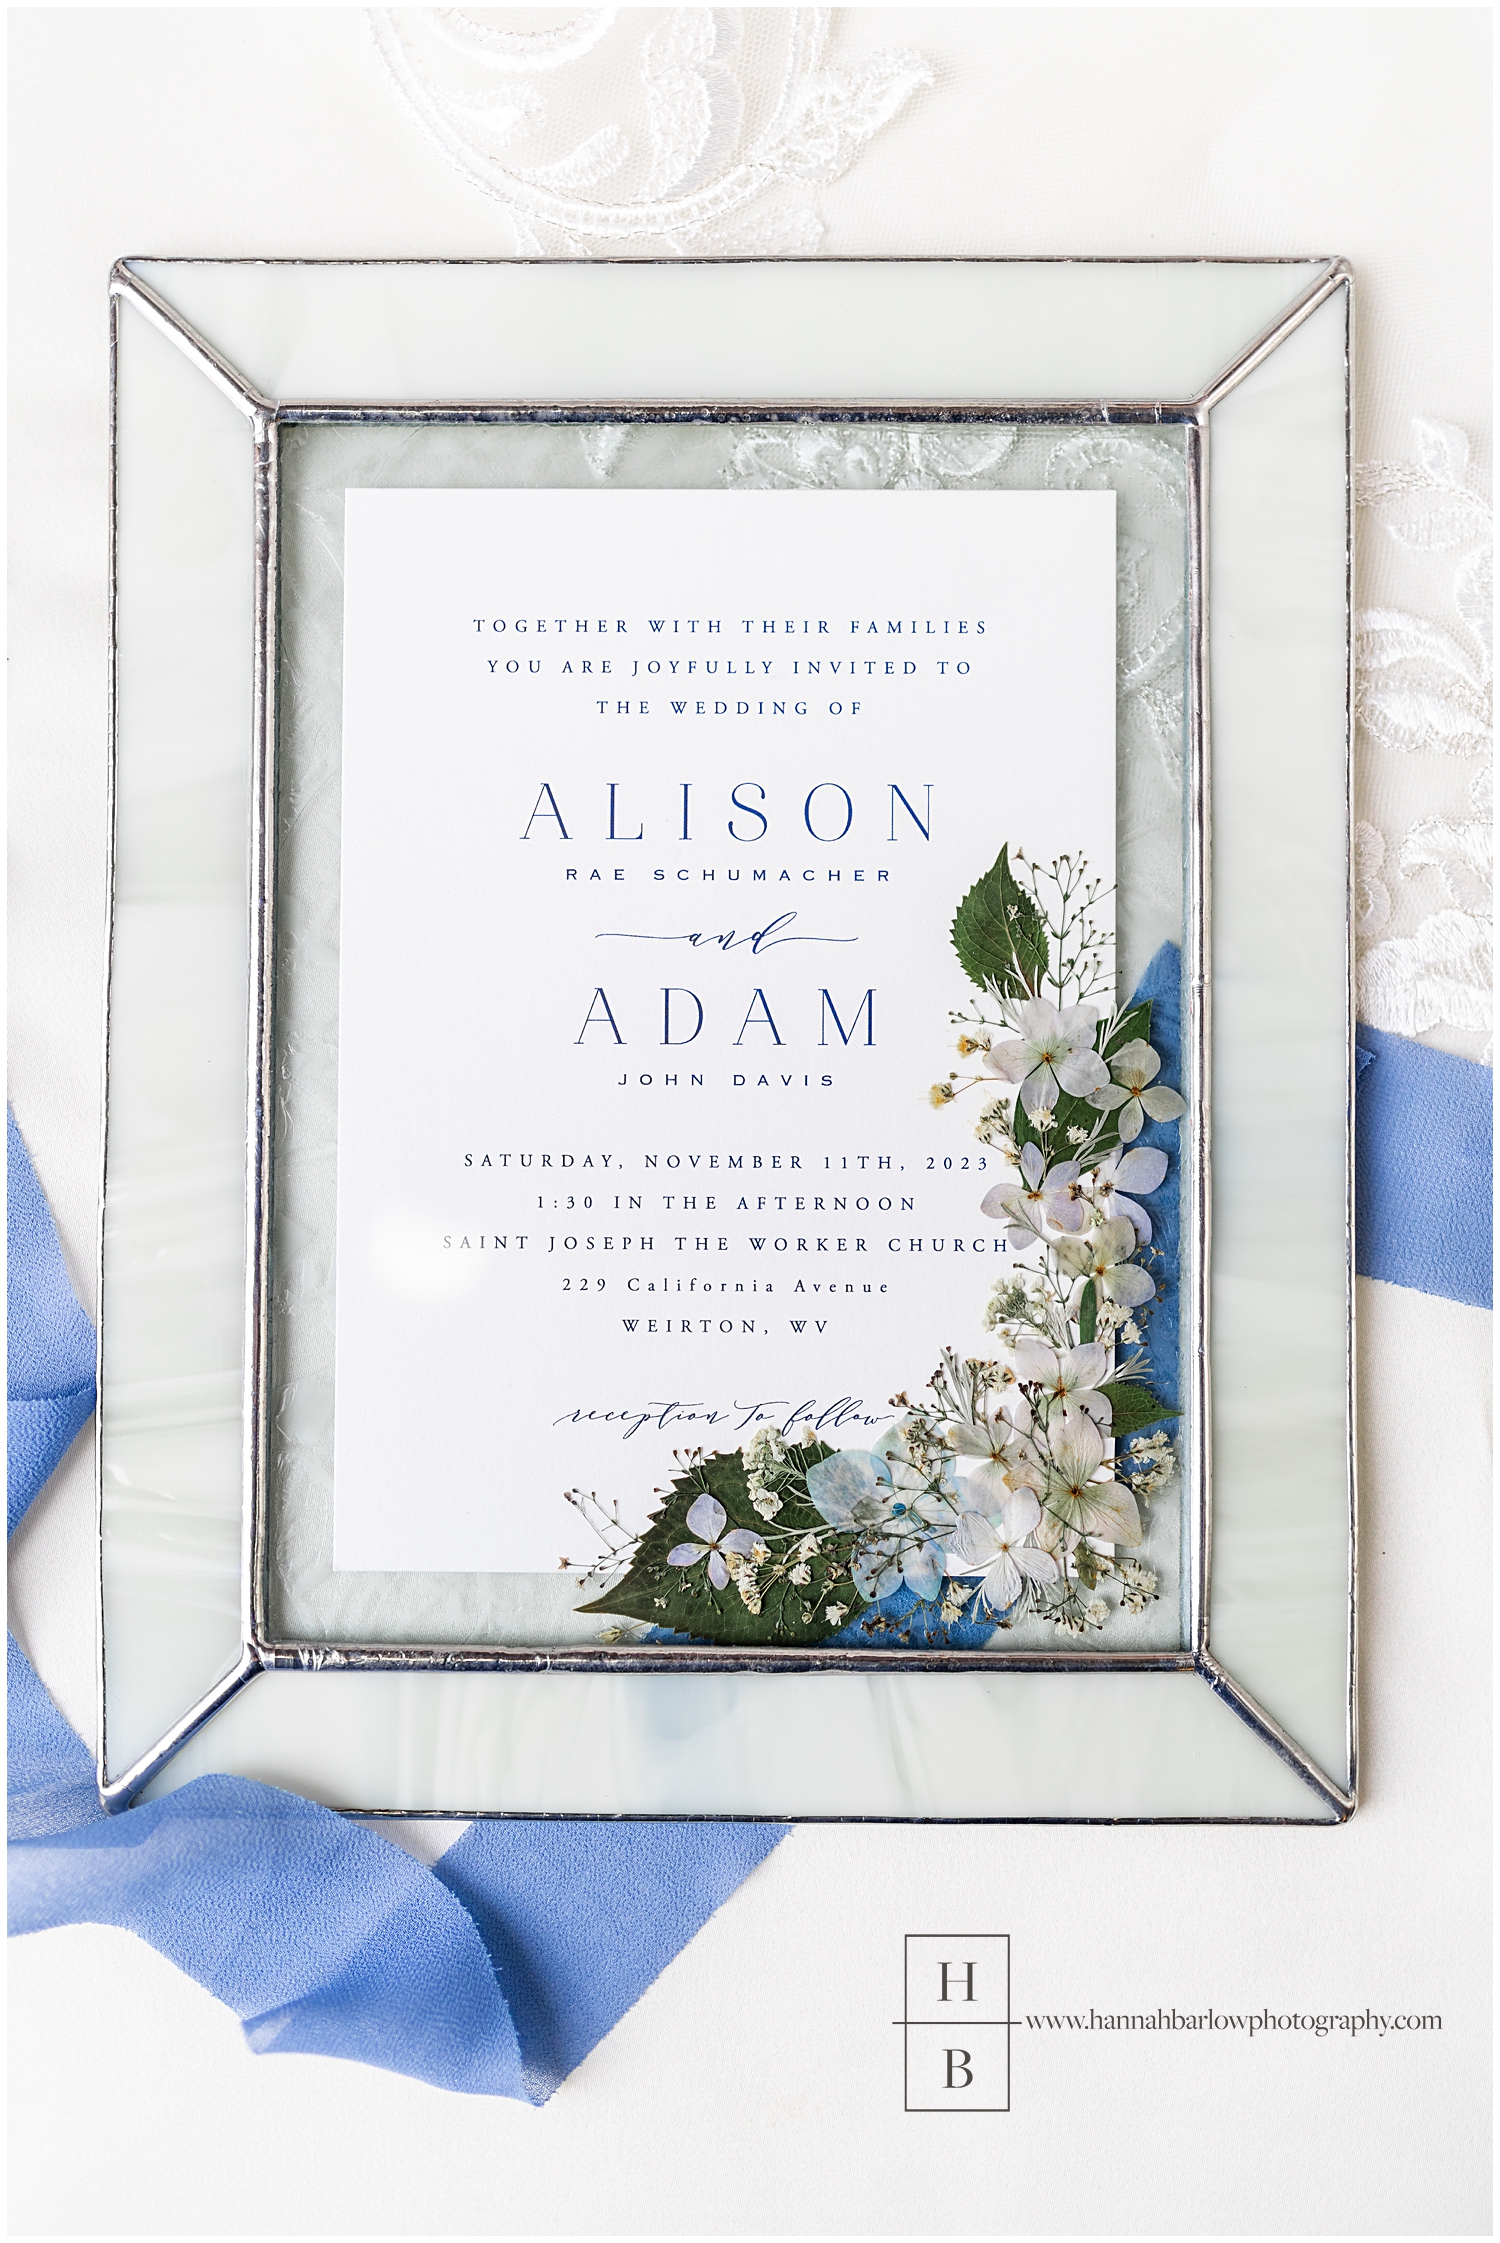 Wedding invitation framed in a white and glass picture frame.